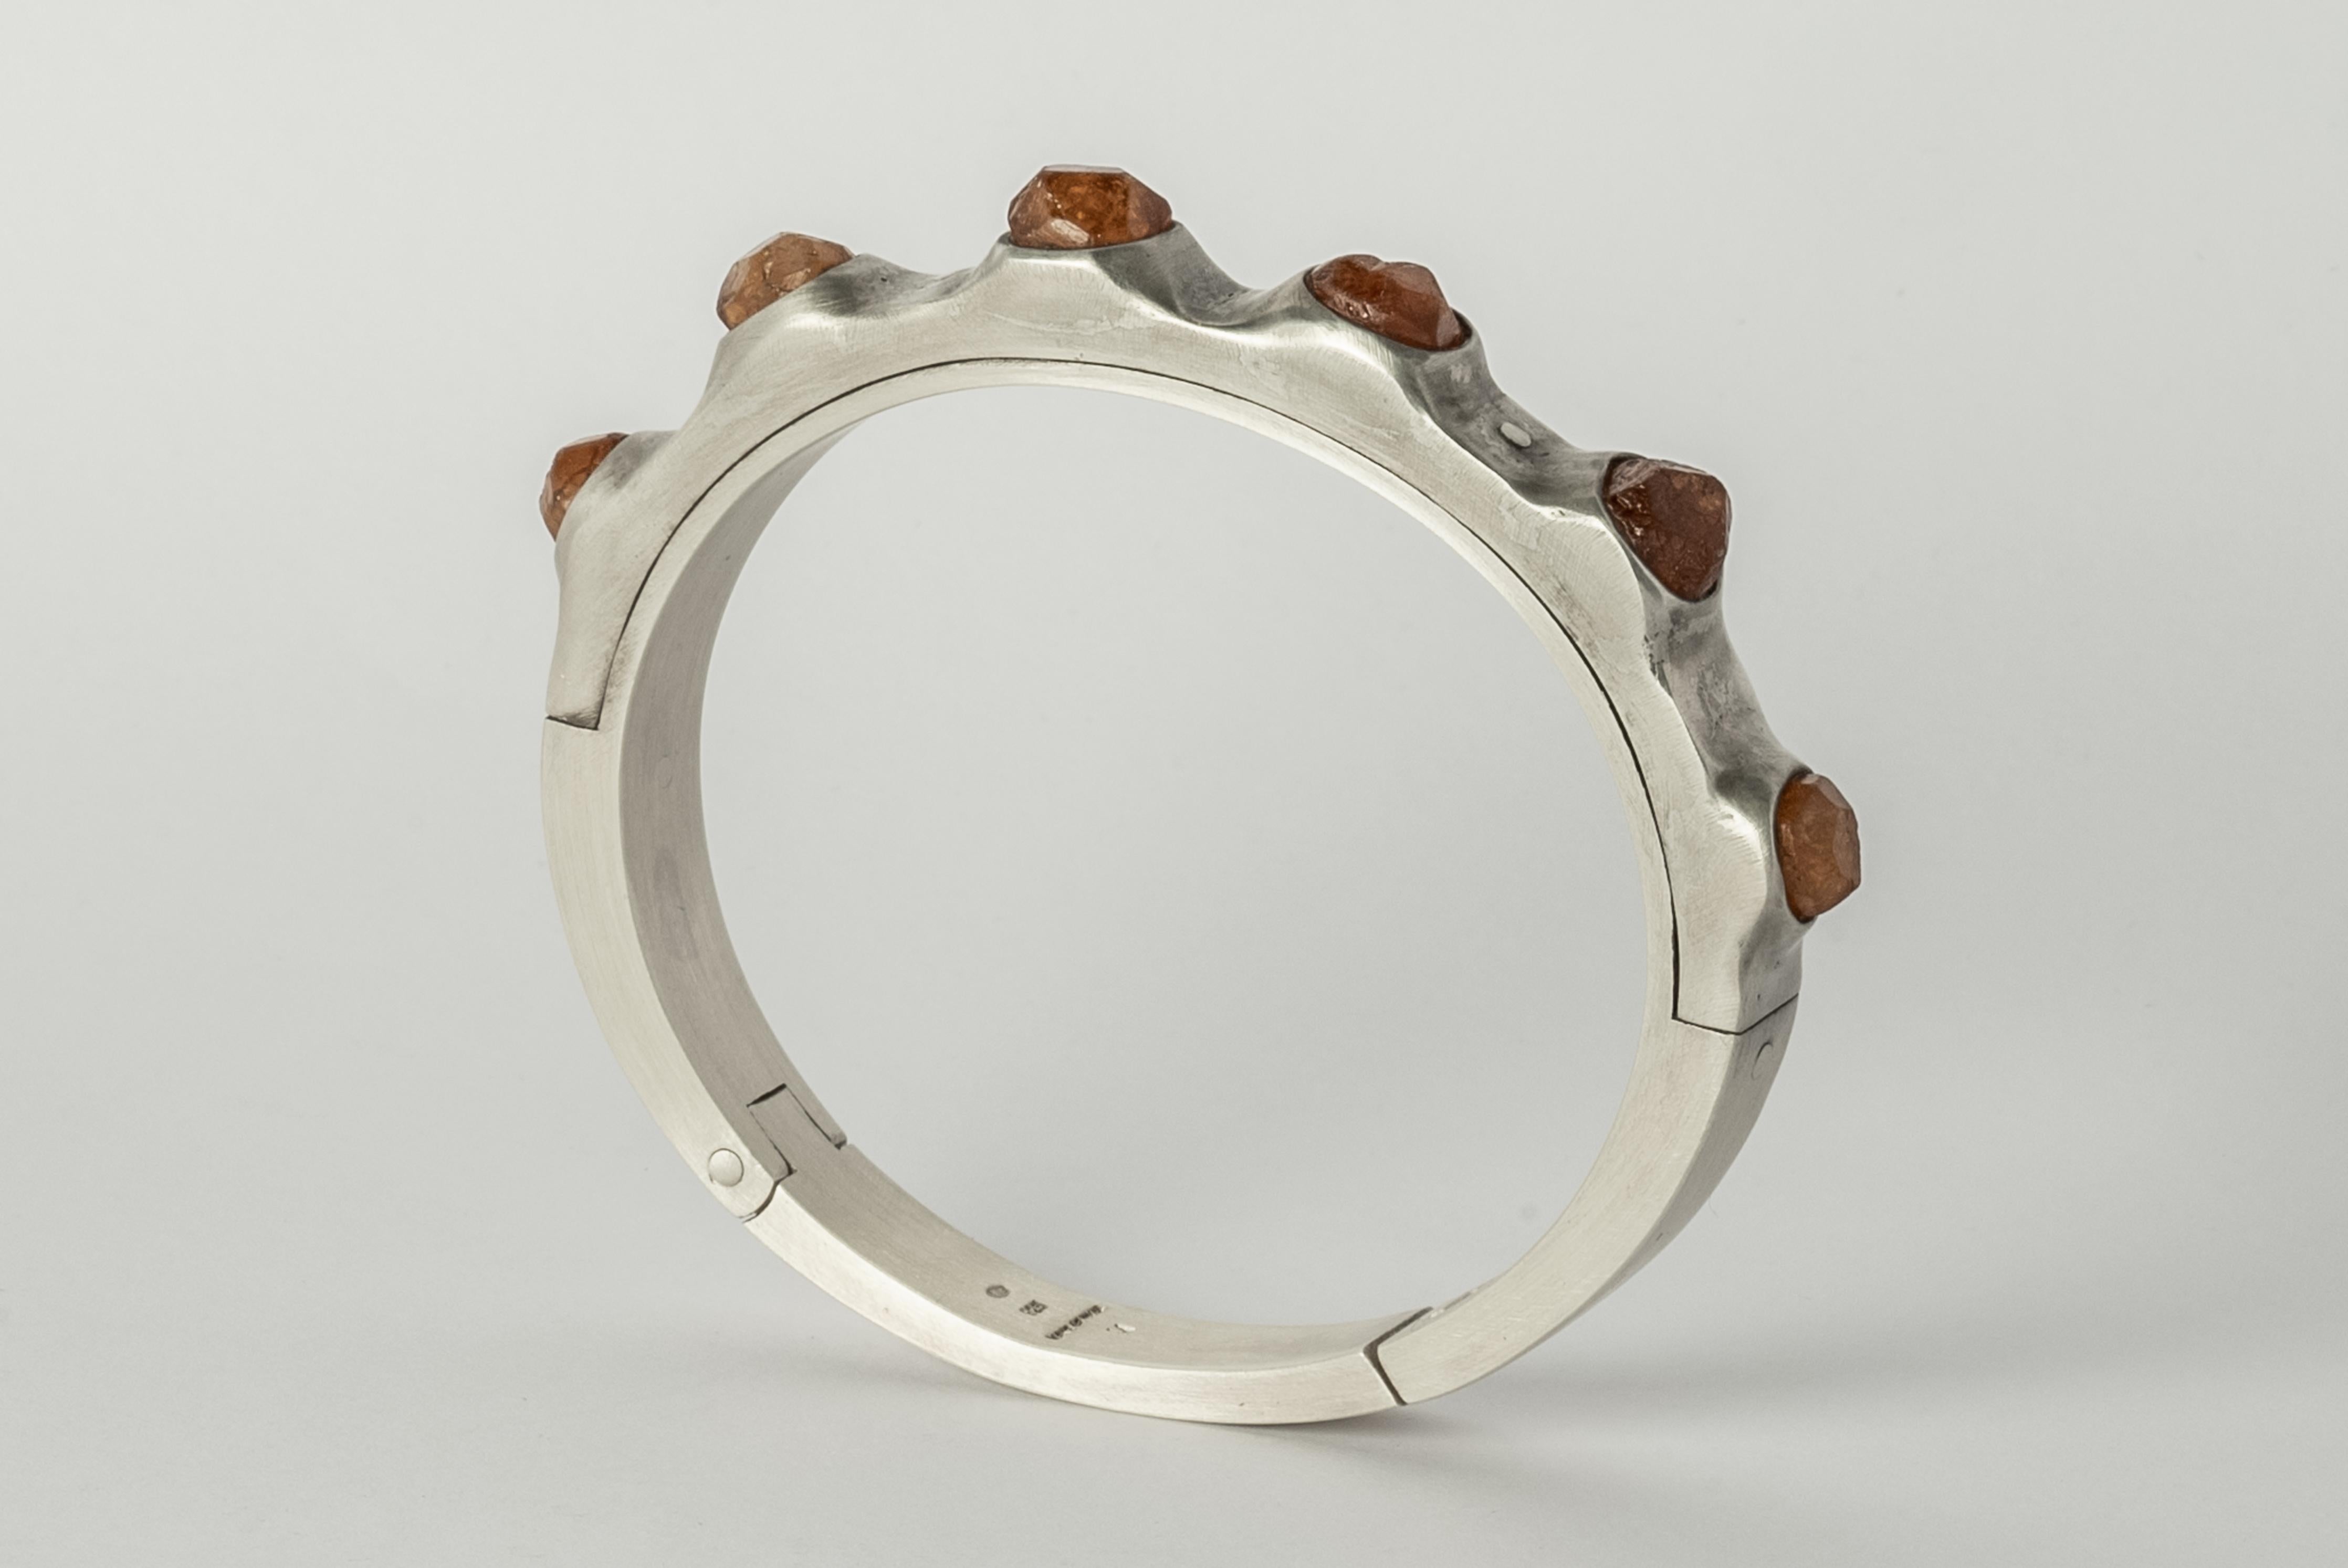 Bracelet in sterling silver and rough spessartite set in terrestrial setting. The Sistema series expresses the core principle of P/4 which is modularity. The 